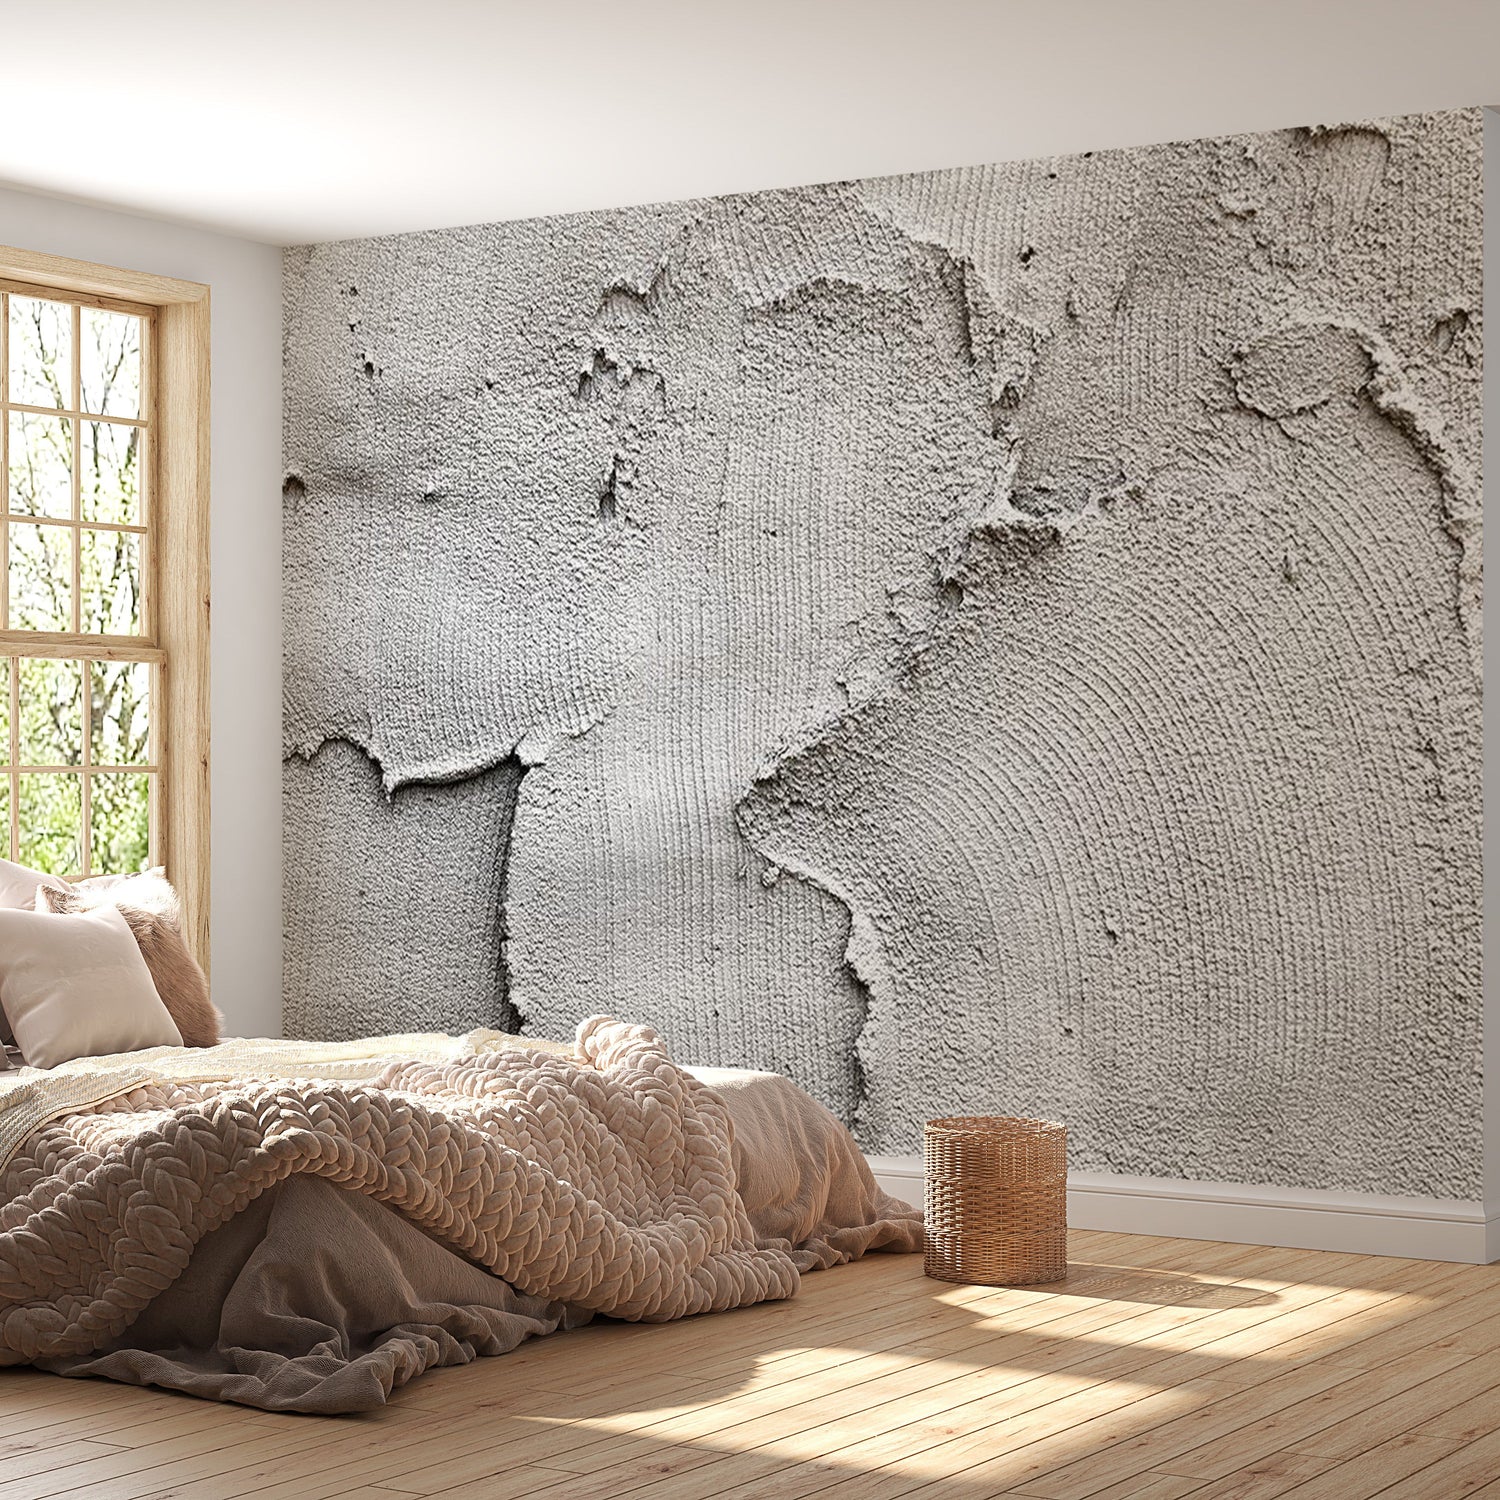 Peel & Stick Wall Mural - Concrete Rough Plaster - Removable Wall Decals